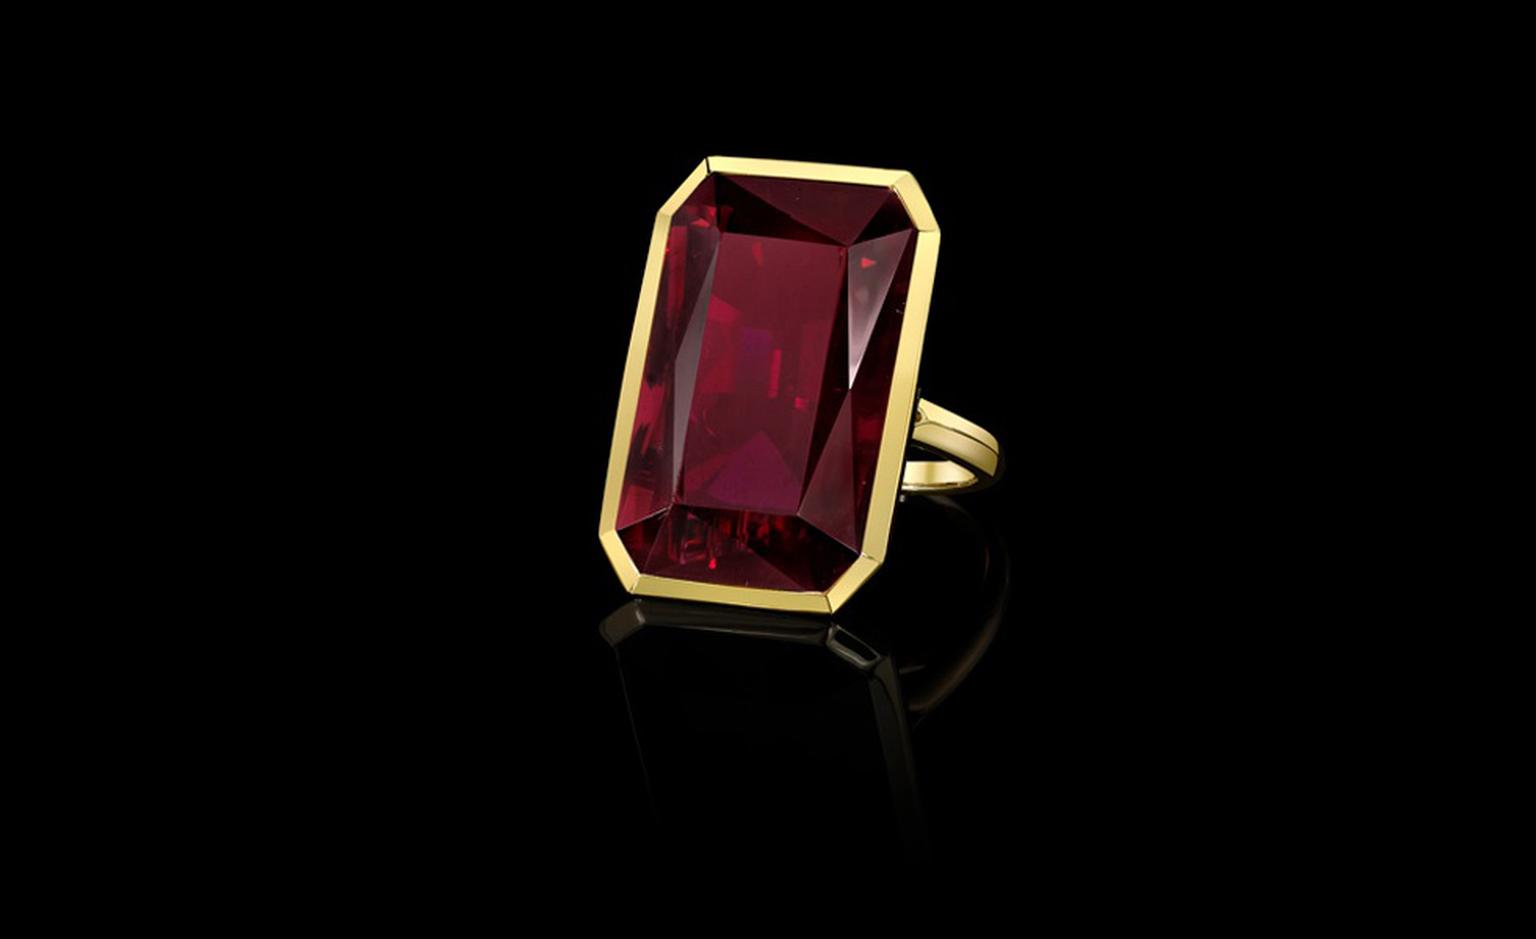 Tablet faceted rubellite ring designed by Angelina Jolie with Robert Procop from the Style of Angelina collection to go on sale later this year. Proceeds will benefit Jolie's charity The Education Partnership for Children of Conflict.